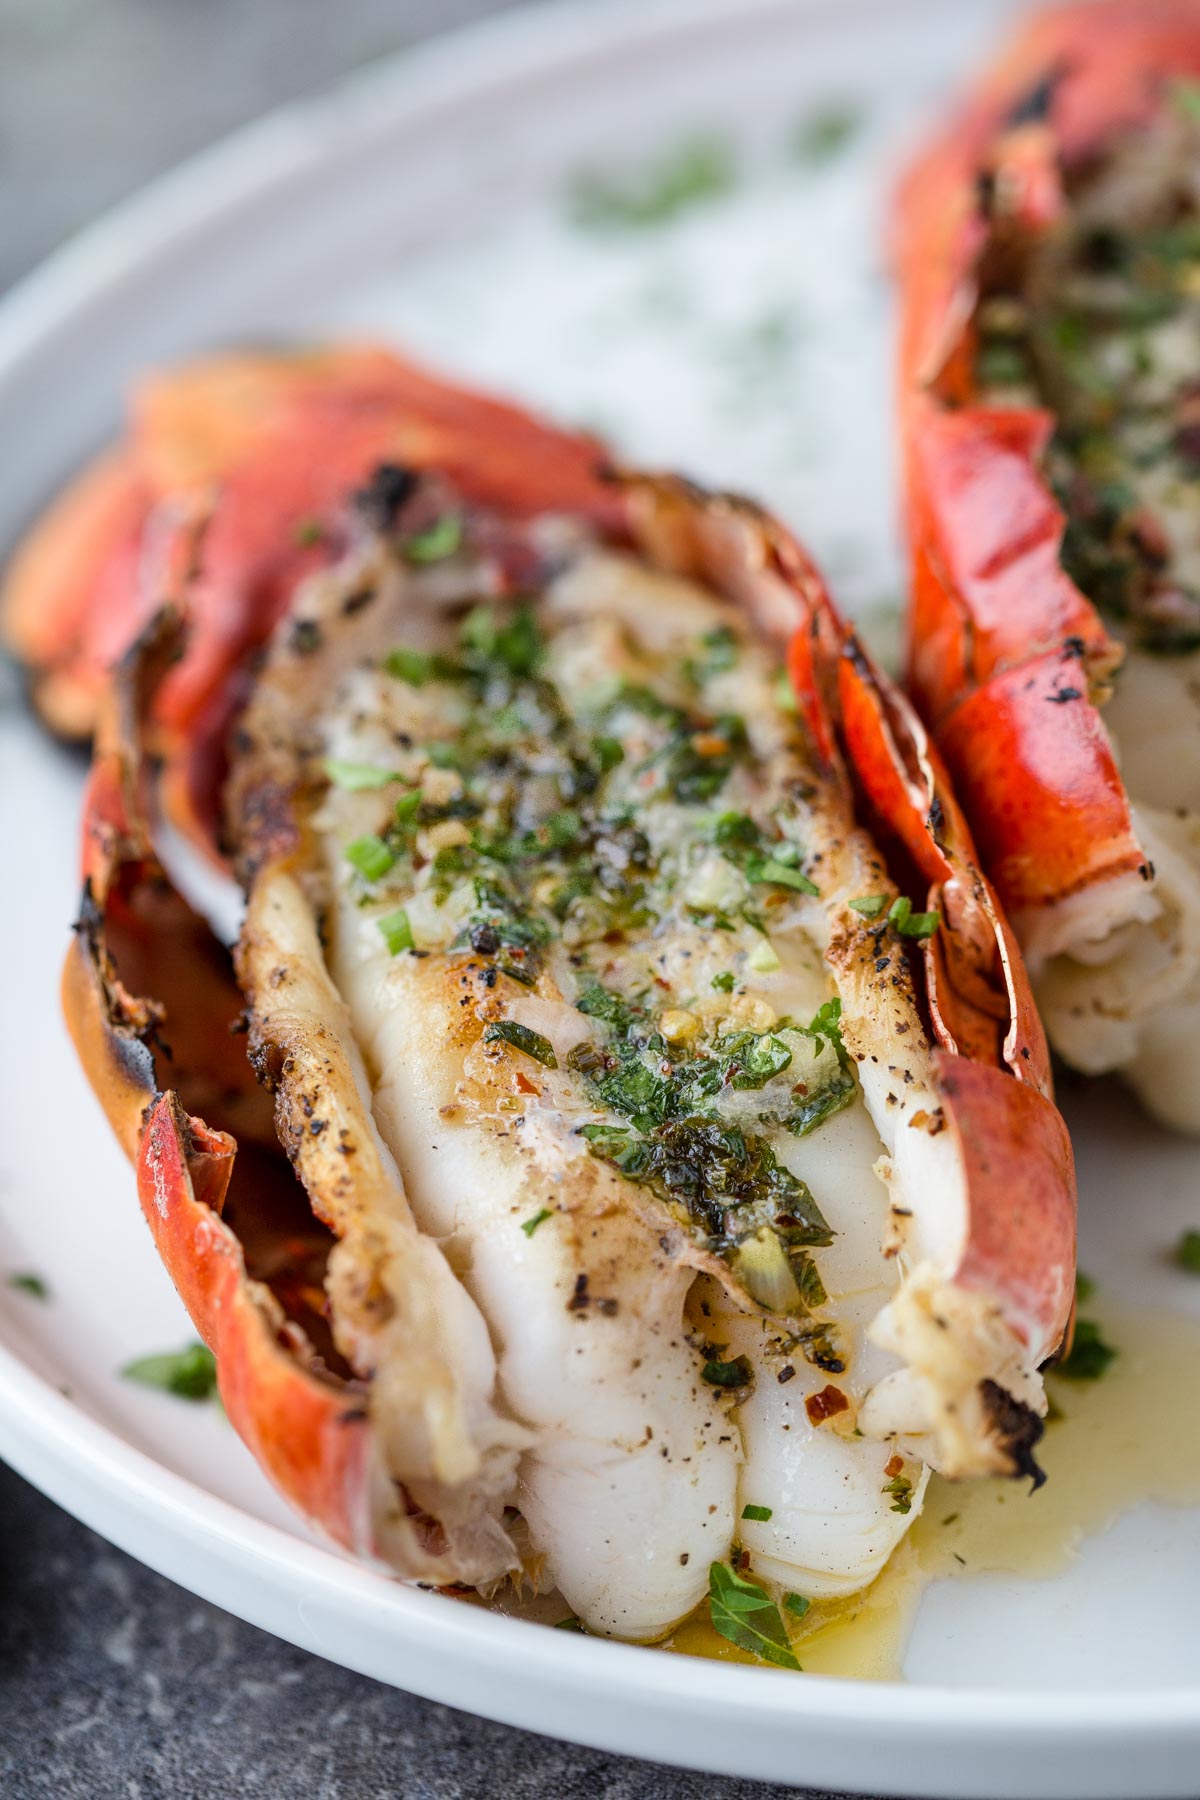 A Grilled Lobster Tail with Herb Compound Butter and a glass of wine for wine pairing